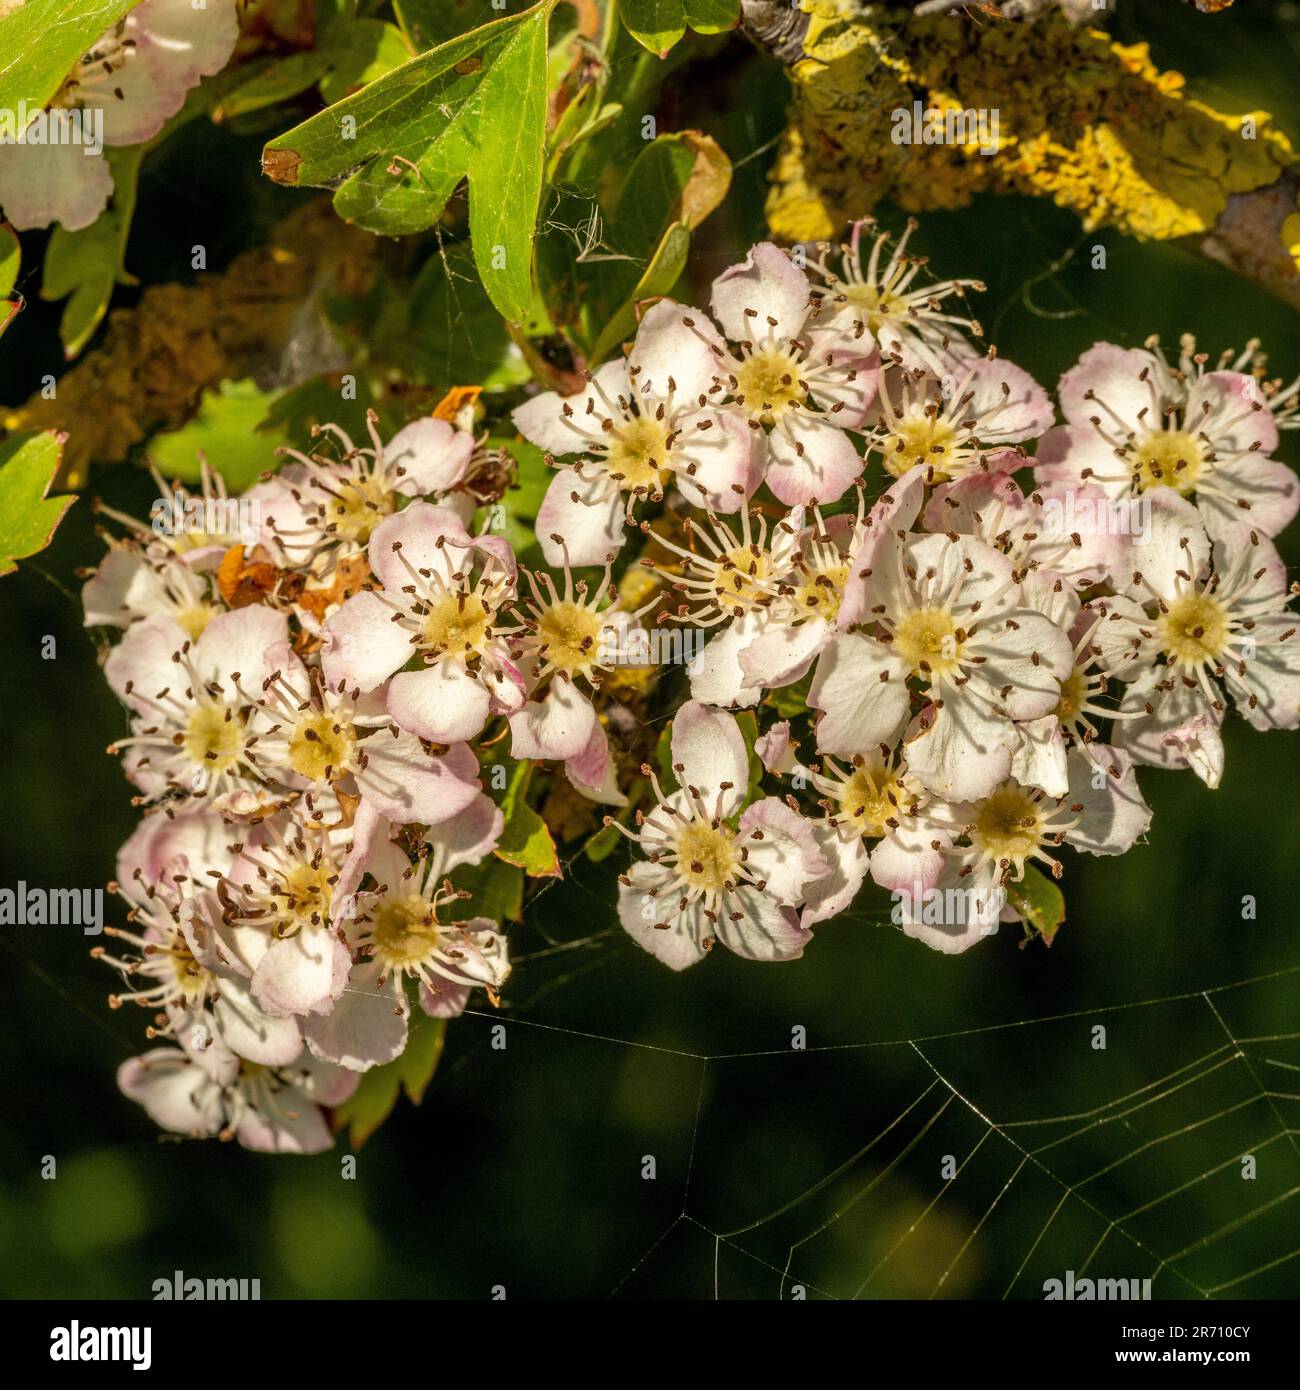 Closeup of the blossom on a common Hawthorn hedge and a cobweb, seen on a sunny spring day in the UK. Stock Photo